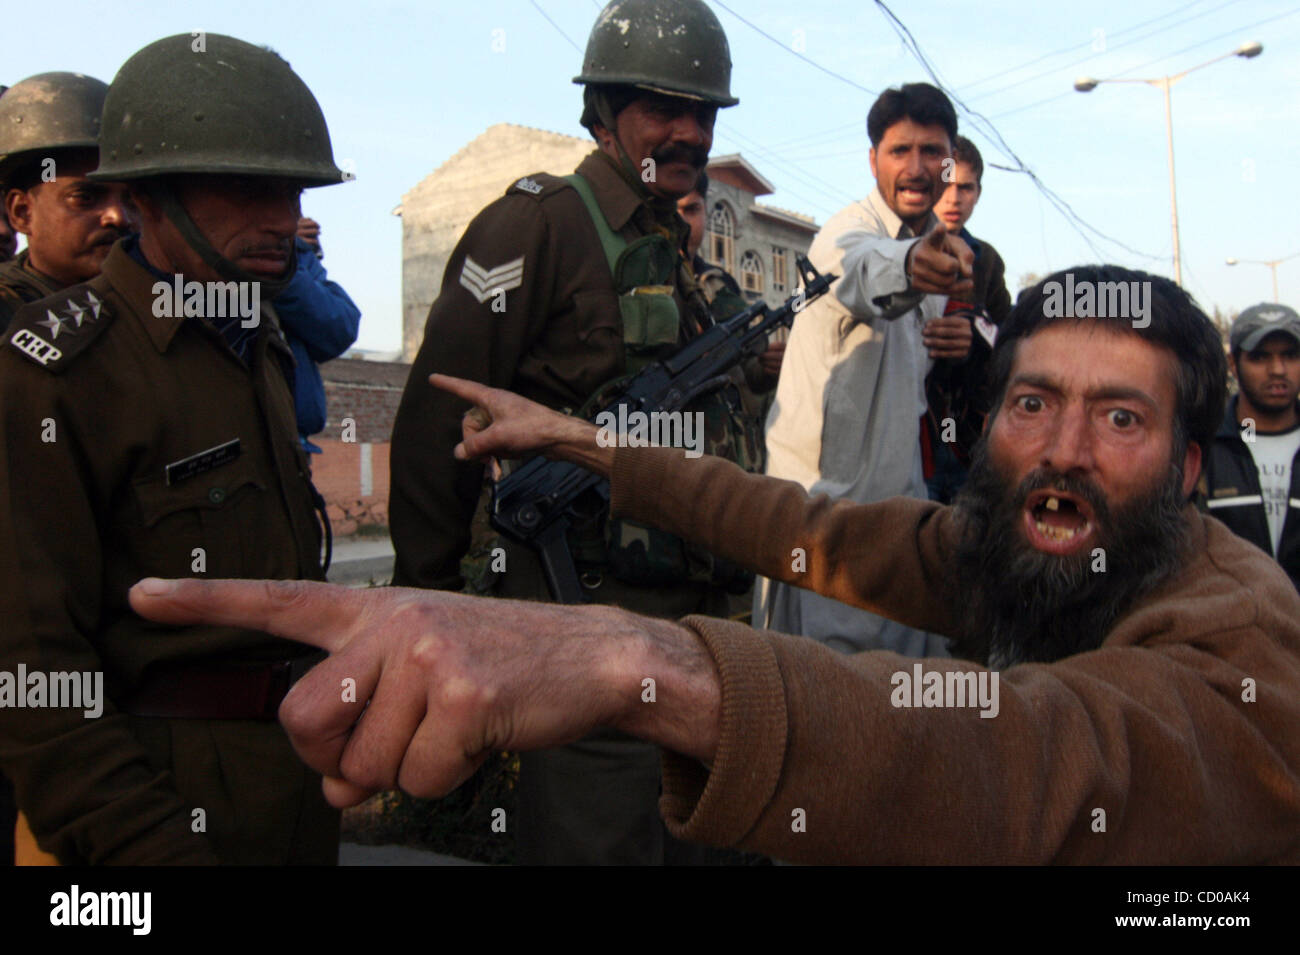 Nov 07, 2008 - Srinagar, Kashmir, India - A protester shouts at troops during a curfew in Srinagar, India. Thousands of troops in riot gear are warning people to stay indoors in an attempt to block a pro-independence rally called by separatists for a second straight day in the Indian portion of Kash Stock Photo